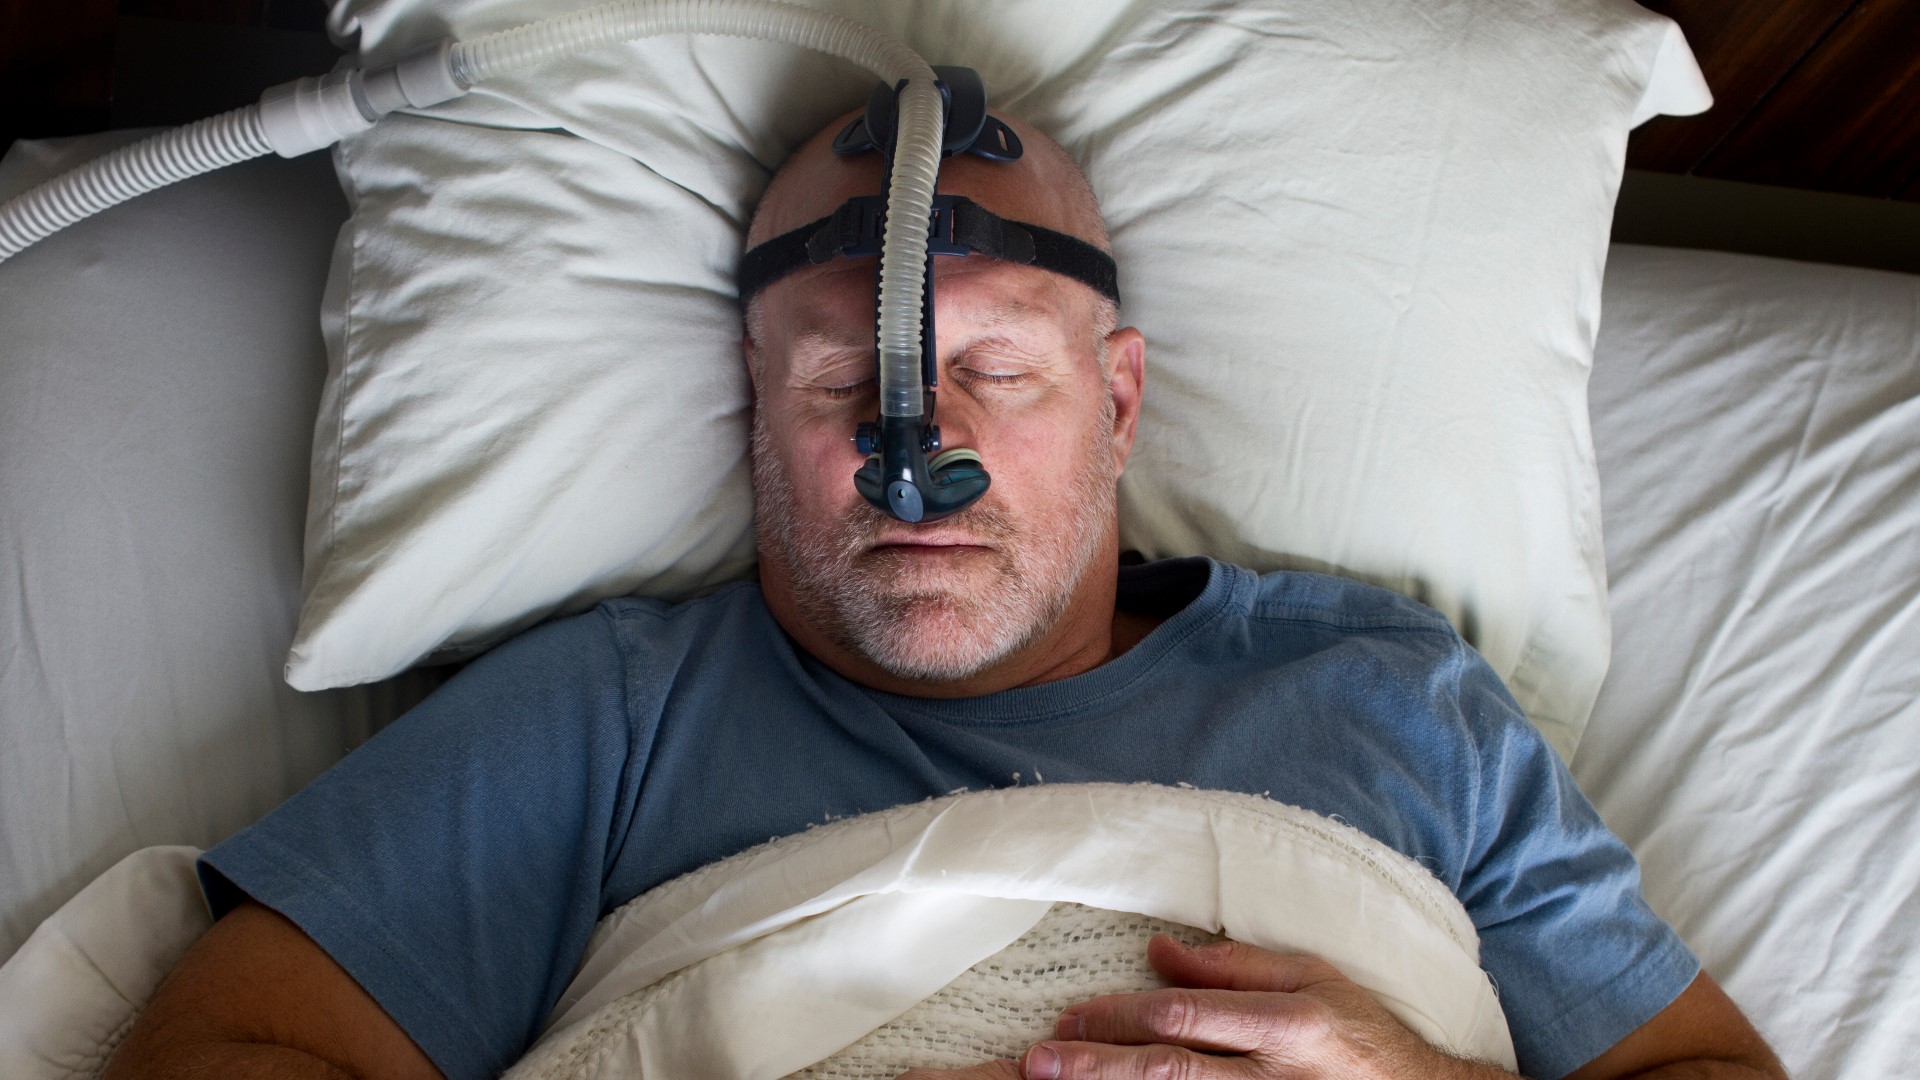 These are the warning signs that you might have sleep apnea.